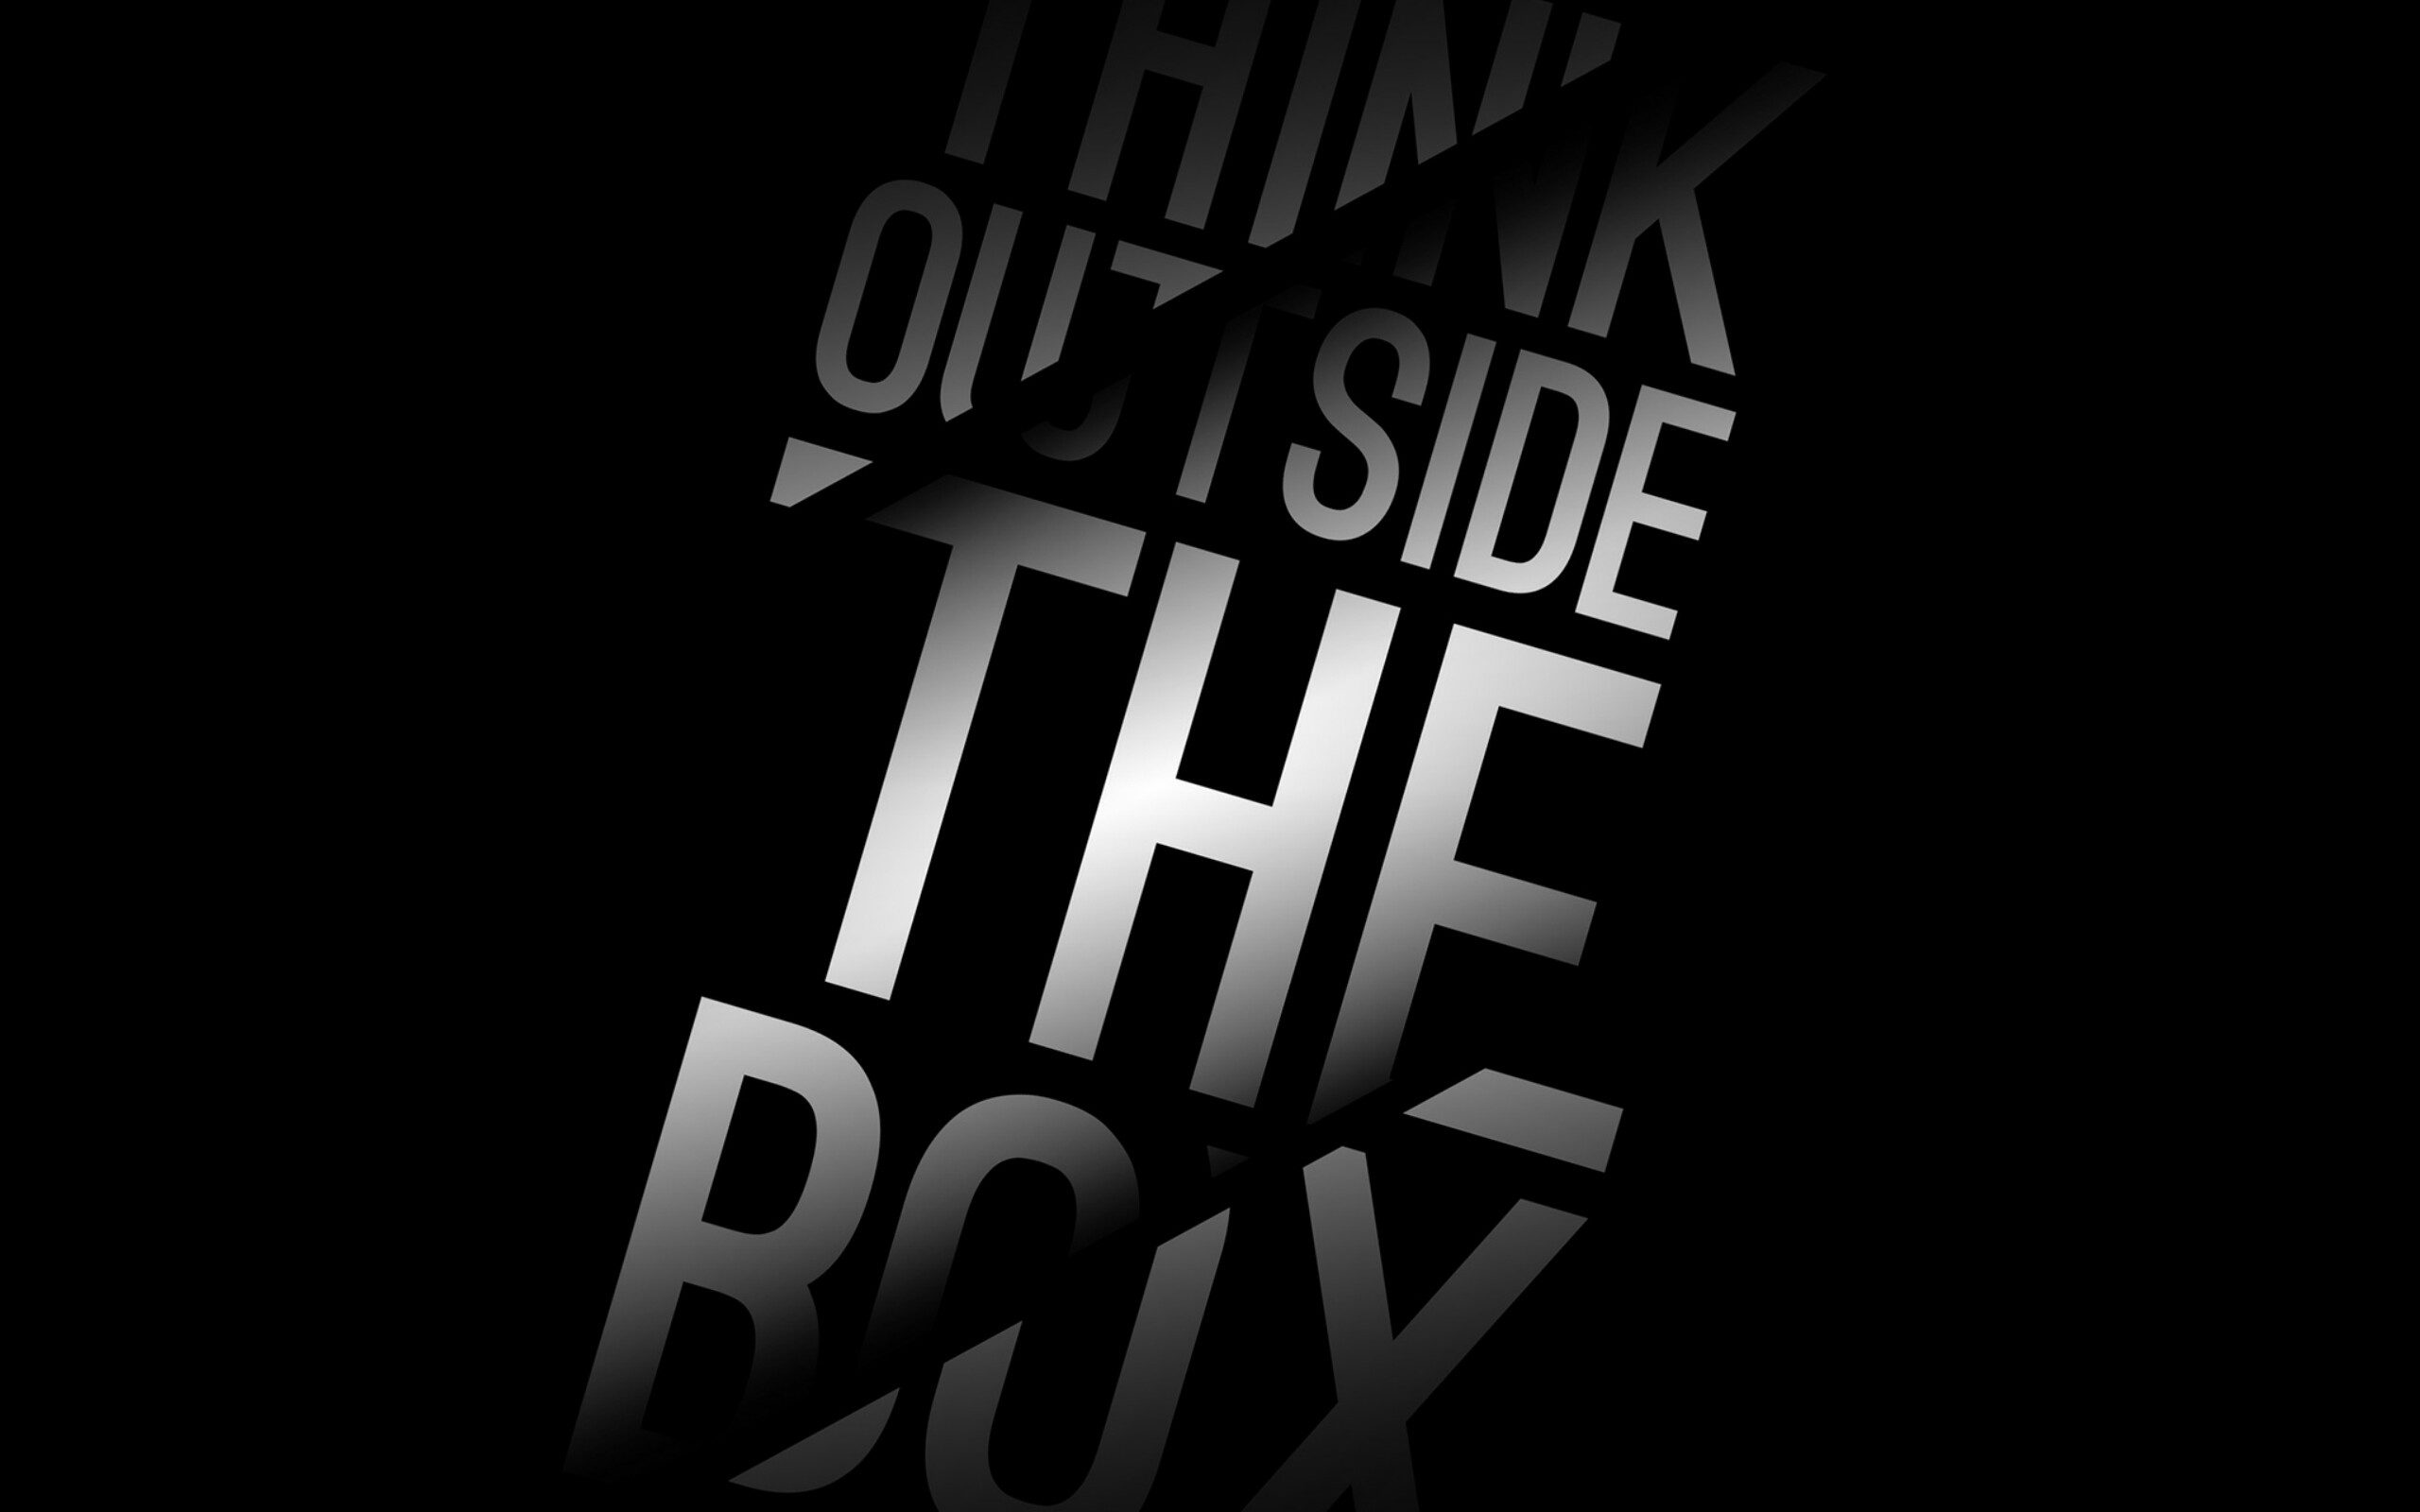 Think Out Of The Box 3D Full Hd Background HD Wallpapers Backgrounds Desktop, iphone & Android Free Download